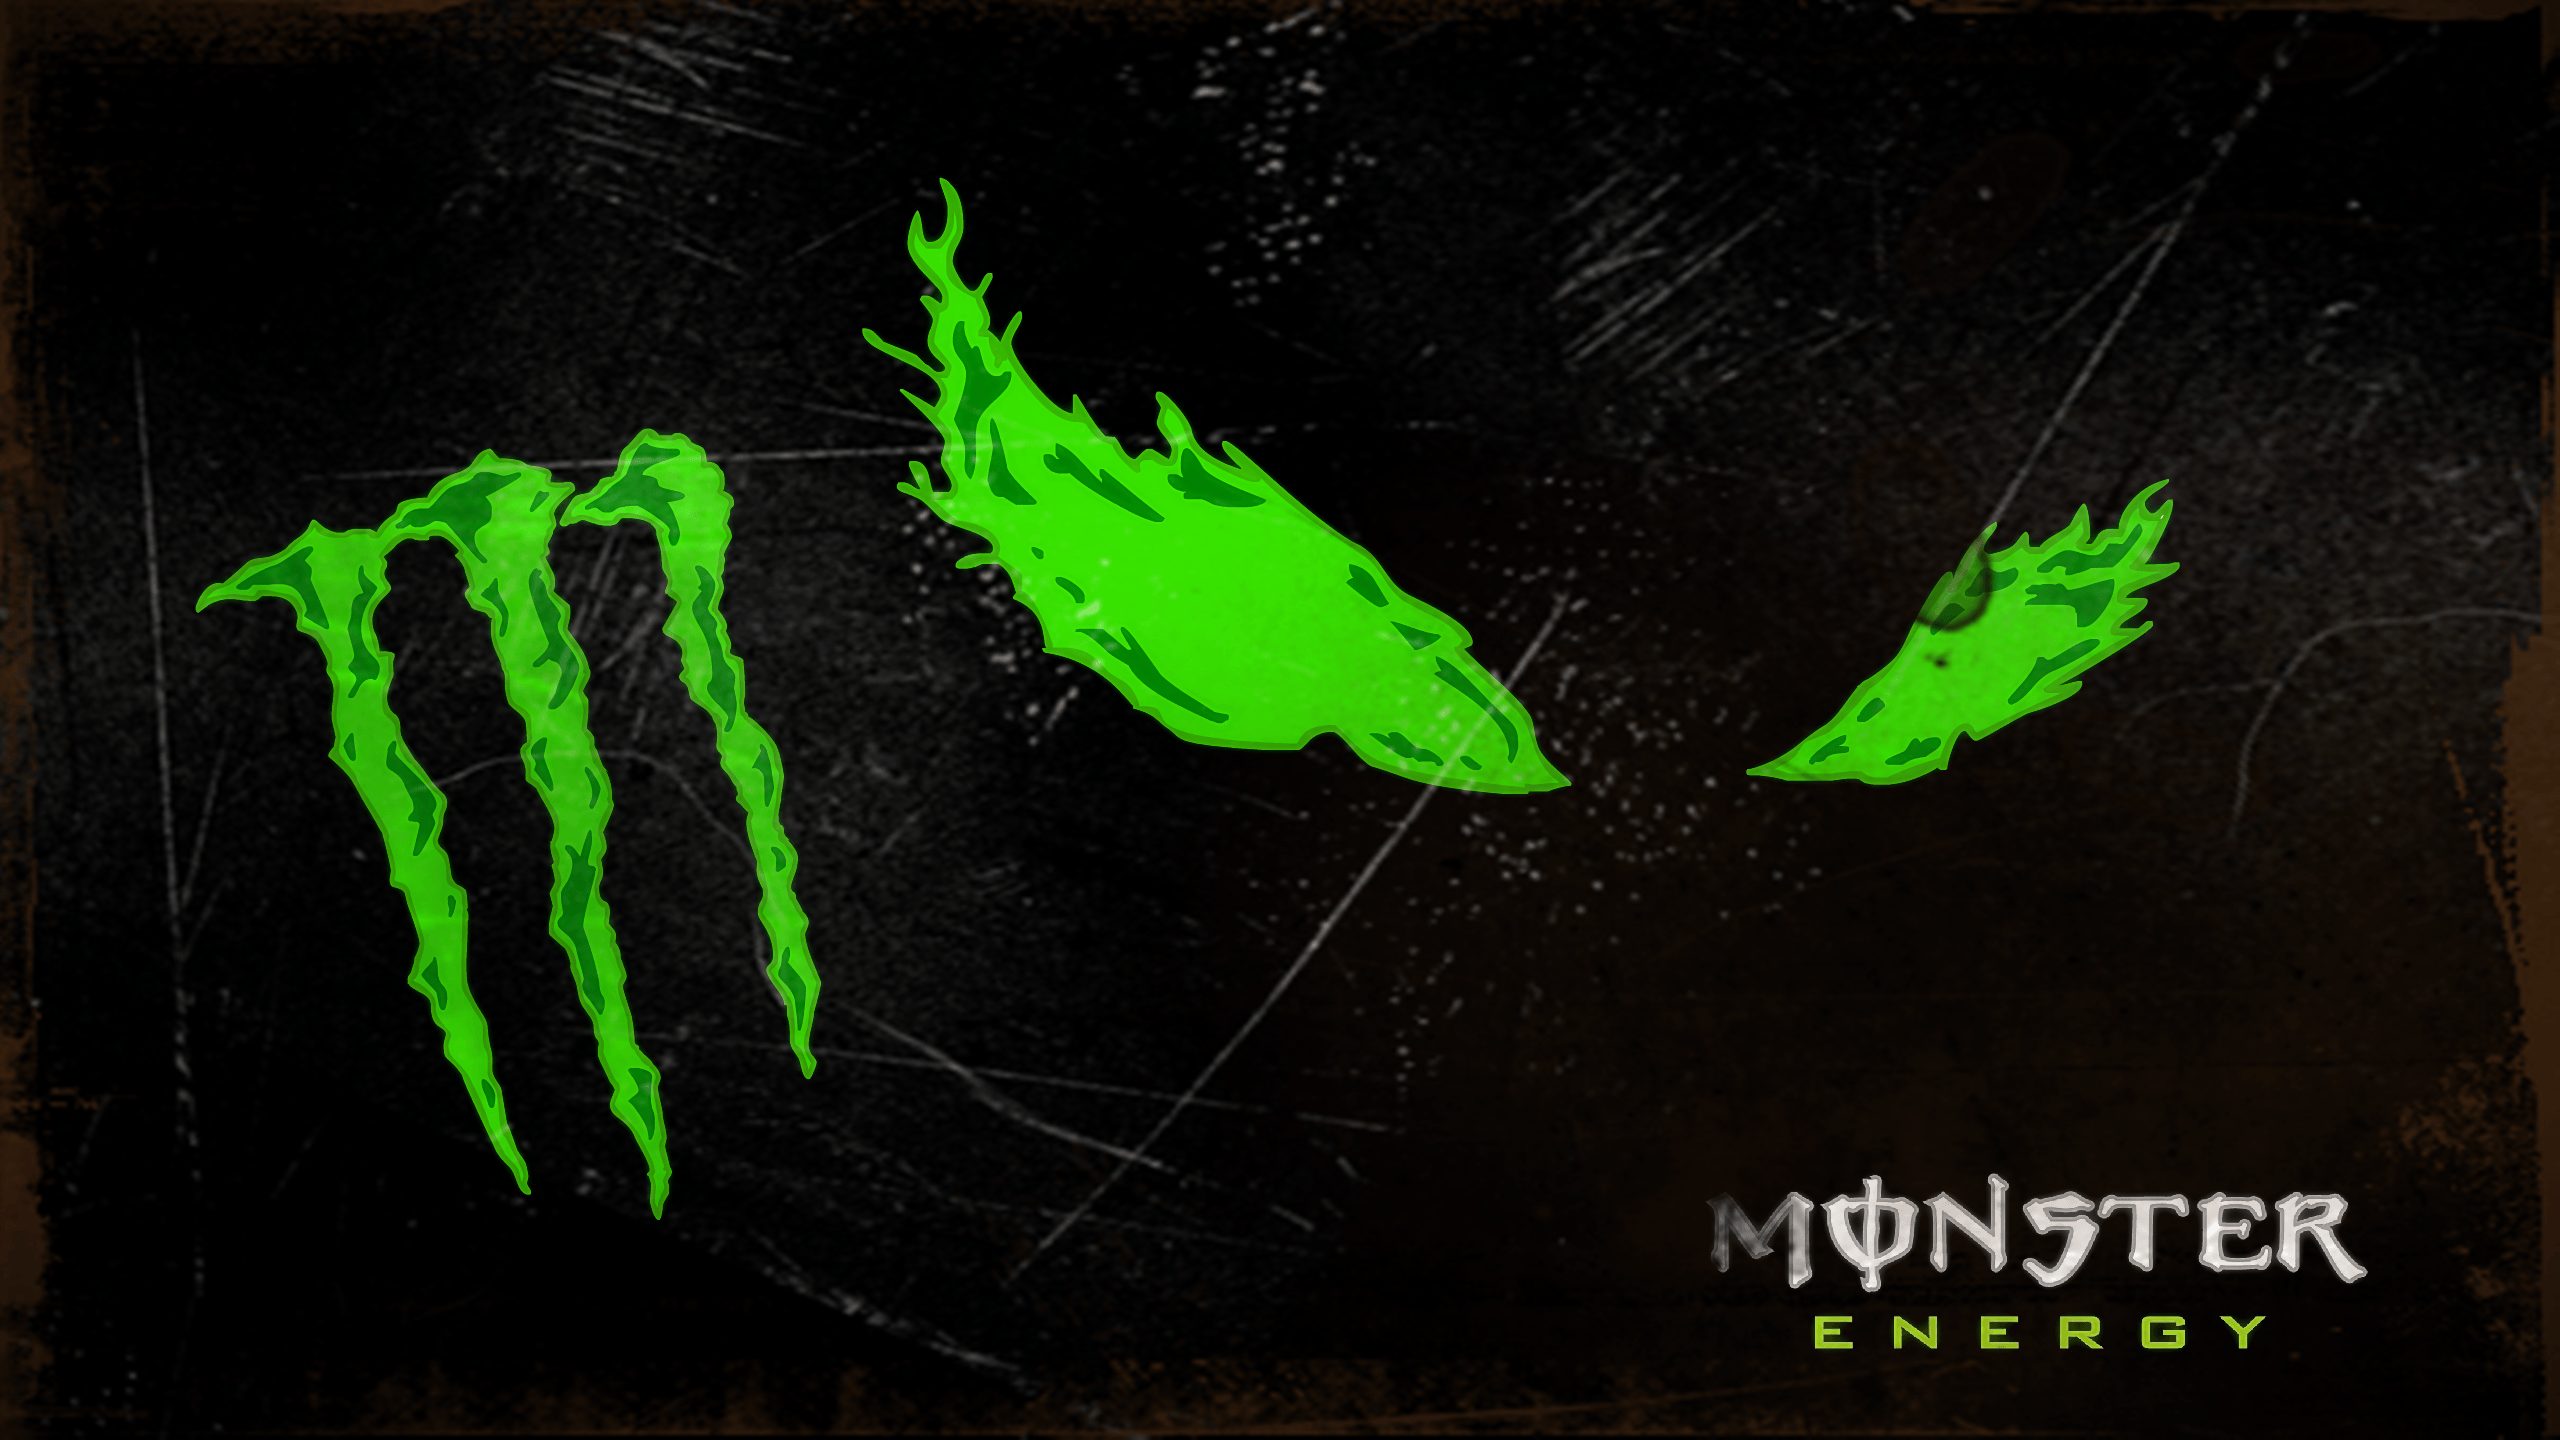 Cool Monster Logo - Monster Energy Background by 8bitblackmage on Newgrounds